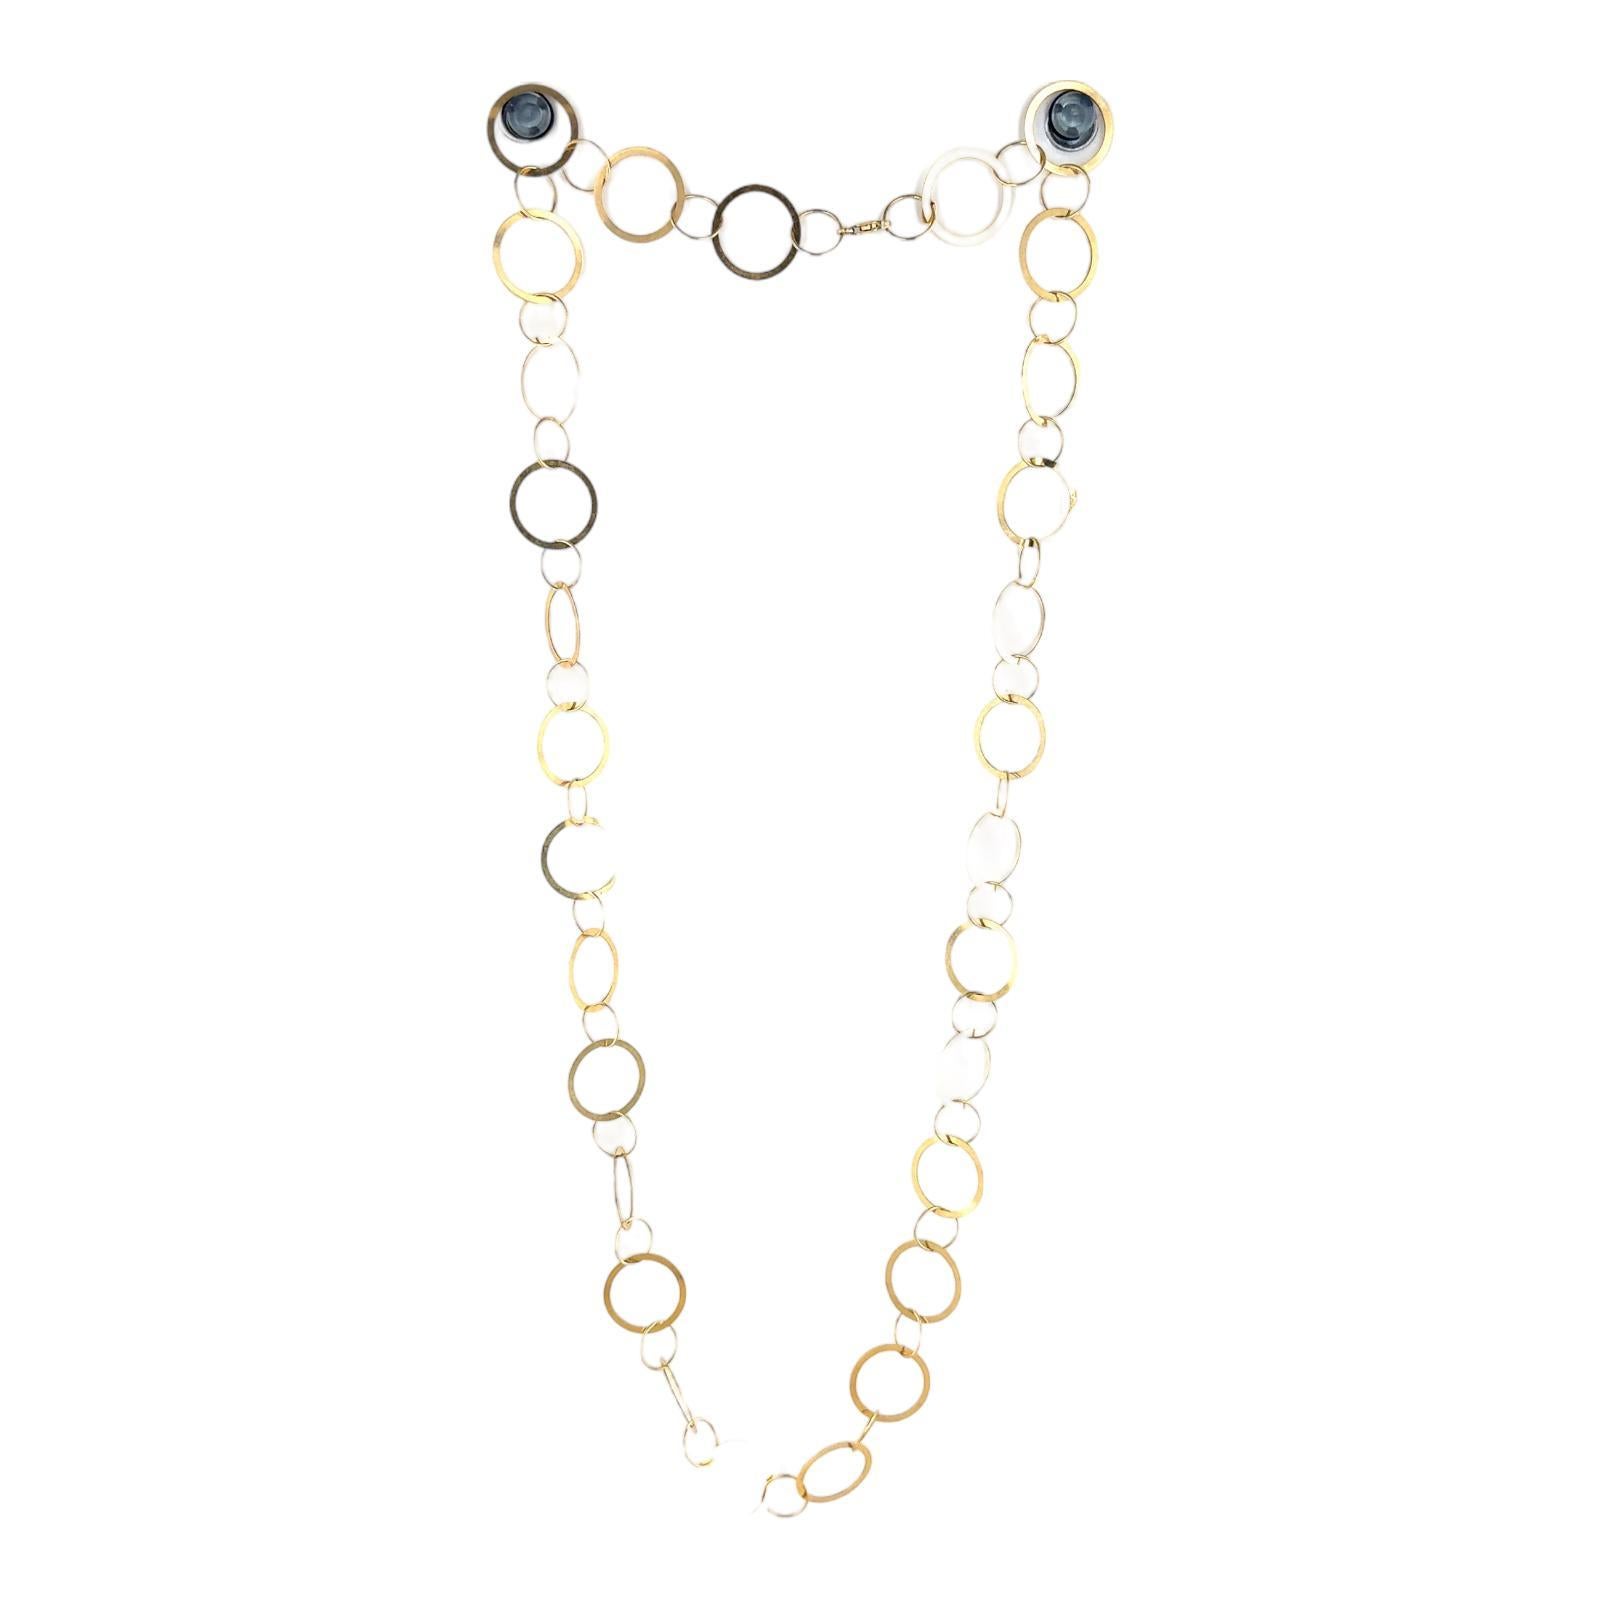 18 Karat Yellow Gold Round Open Link Modern Necklace 36 Inches In Excellent Condition For Sale In Boca Raton, FL